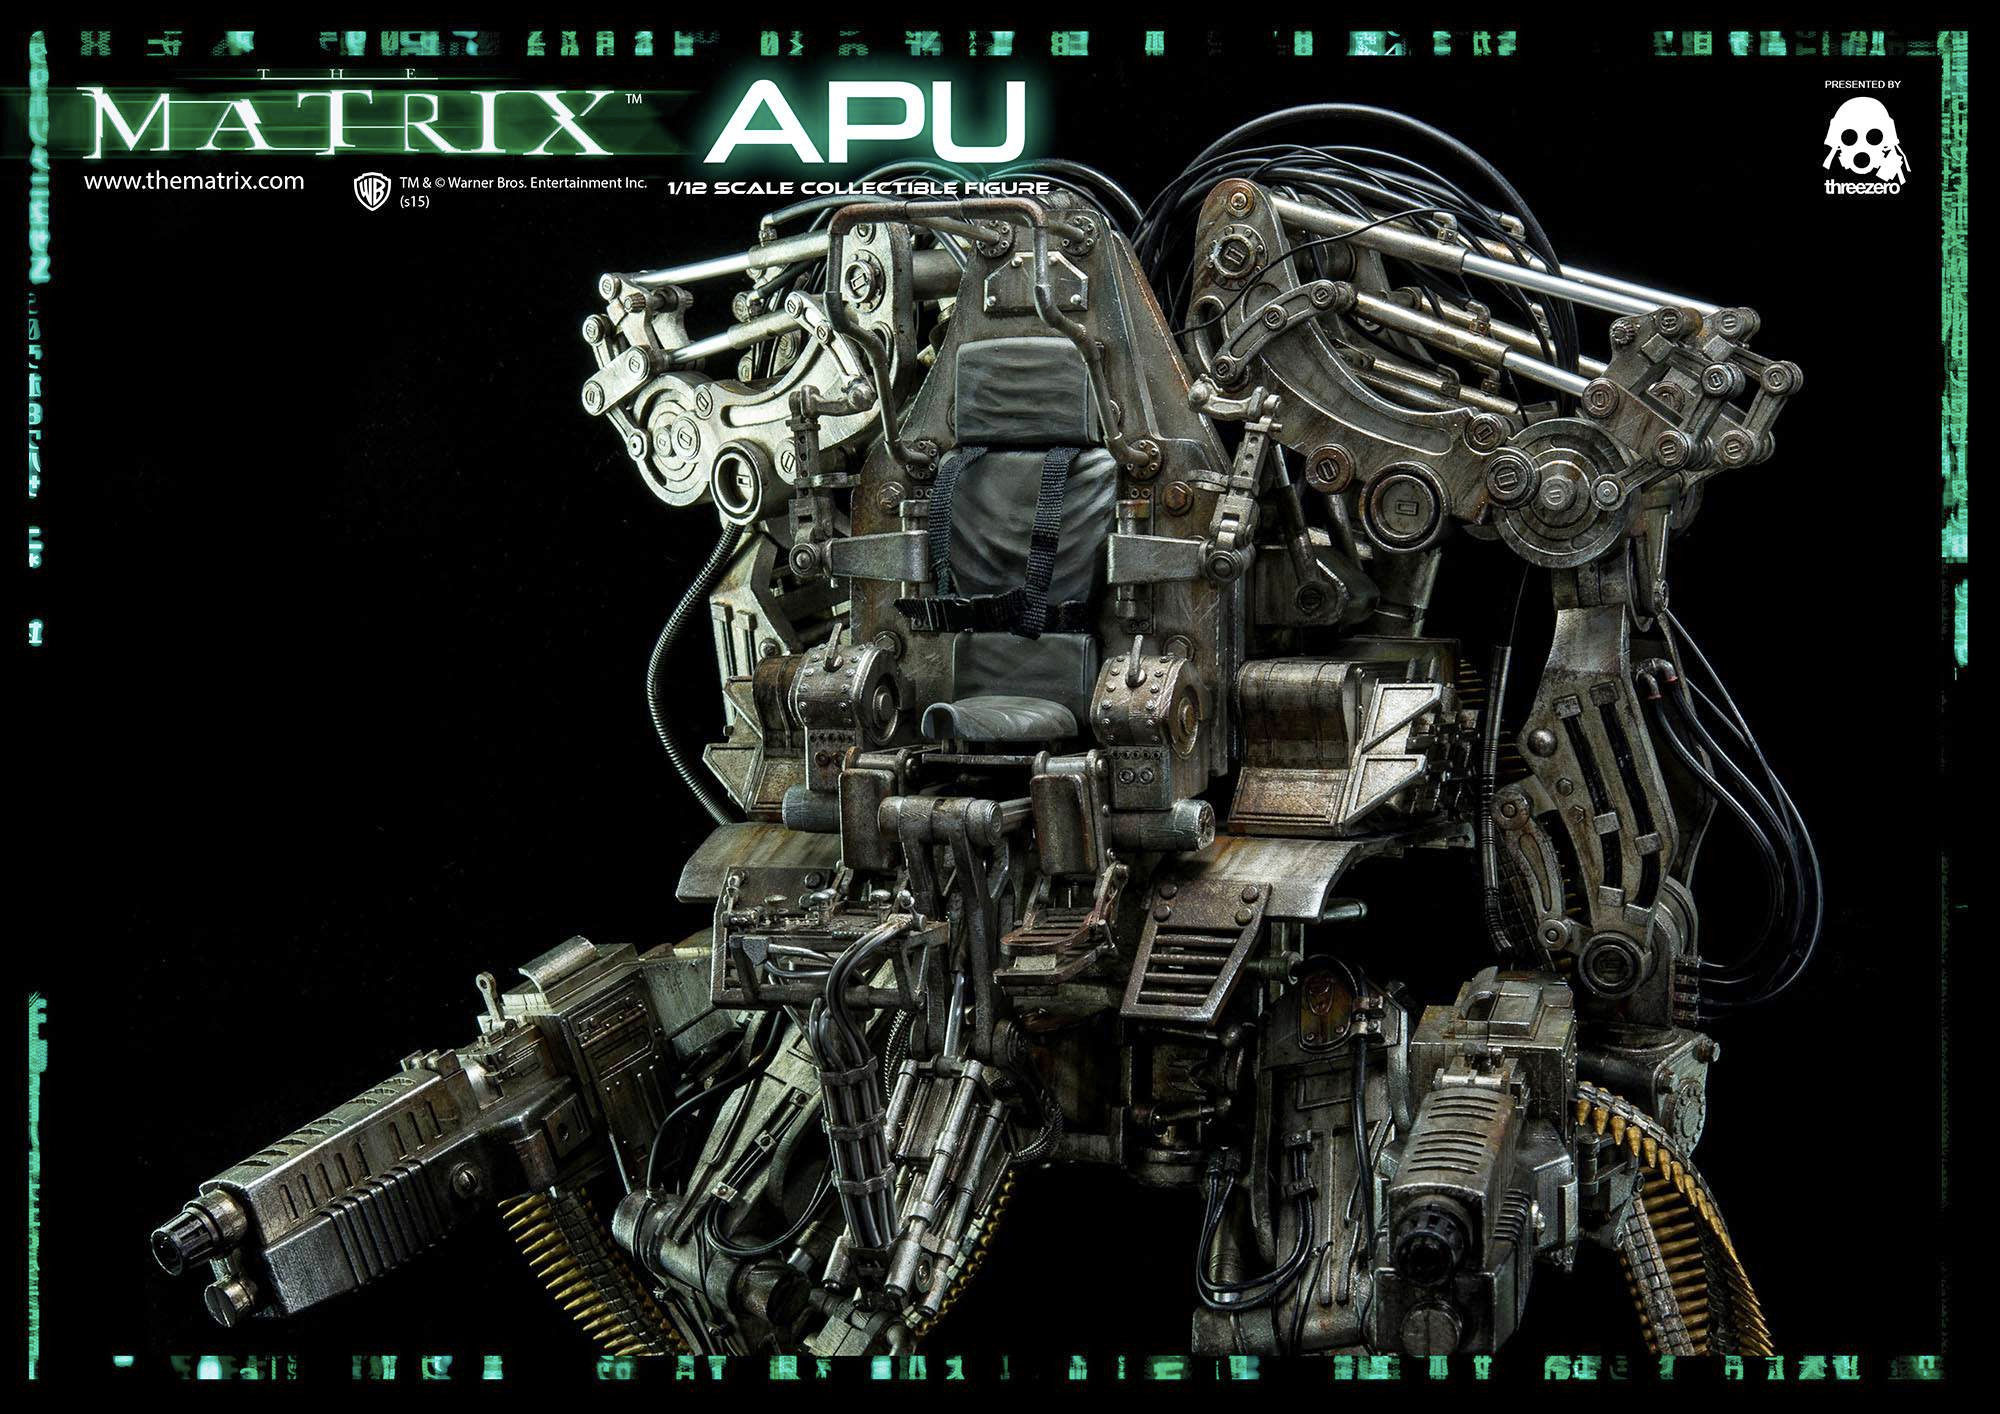 Despite The Movie, This Mech From The Matrix Revolutions Is Marvellous